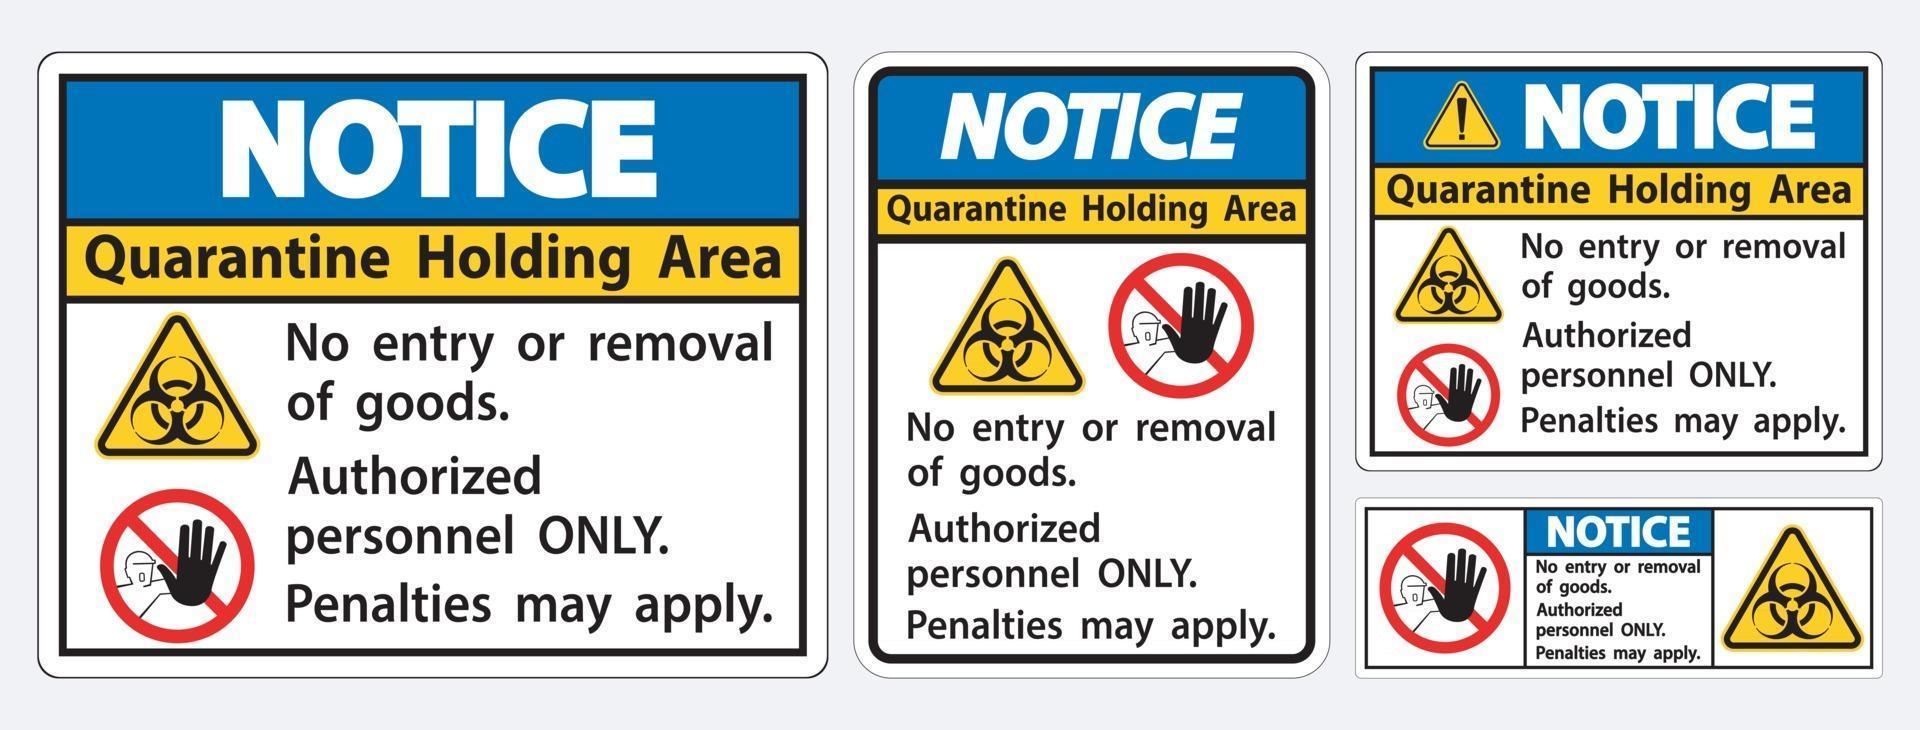 Notice Quarantine Holding Area Sign Isolate On White Background,Vector Illustration EPS.10 vector